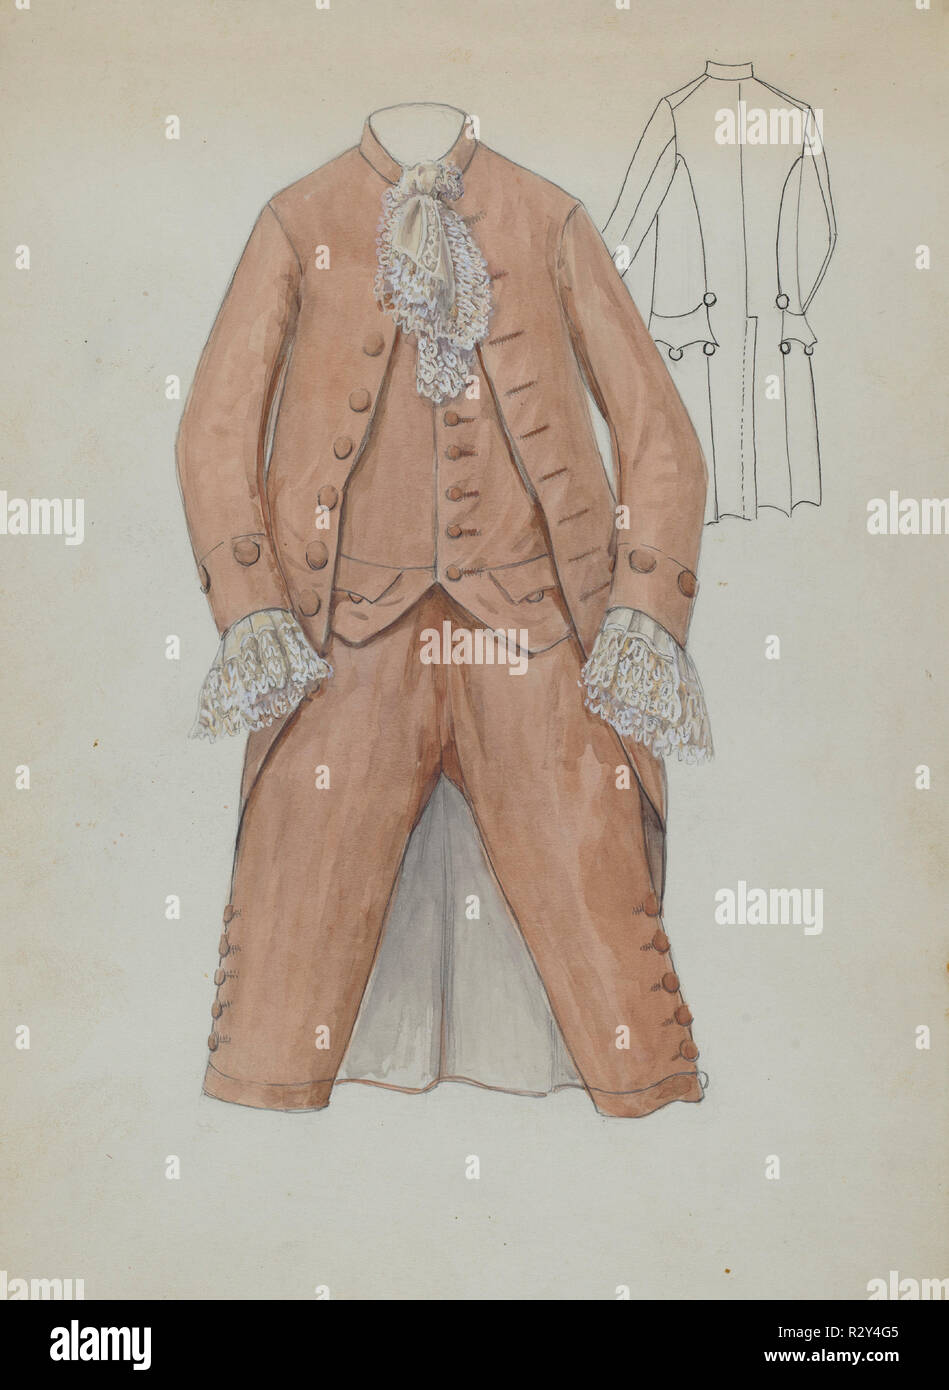 Man's Costume. Dated: c. 1936. Dimensions: overall: 30.7 x 22.9 cm (12 1/16 x 9 in.). Medium: watercolor, graphite, and gouache on paper. Museum: National Gallery of Art, Washington DC. Author: Jessie M. Benge. Stock Photo